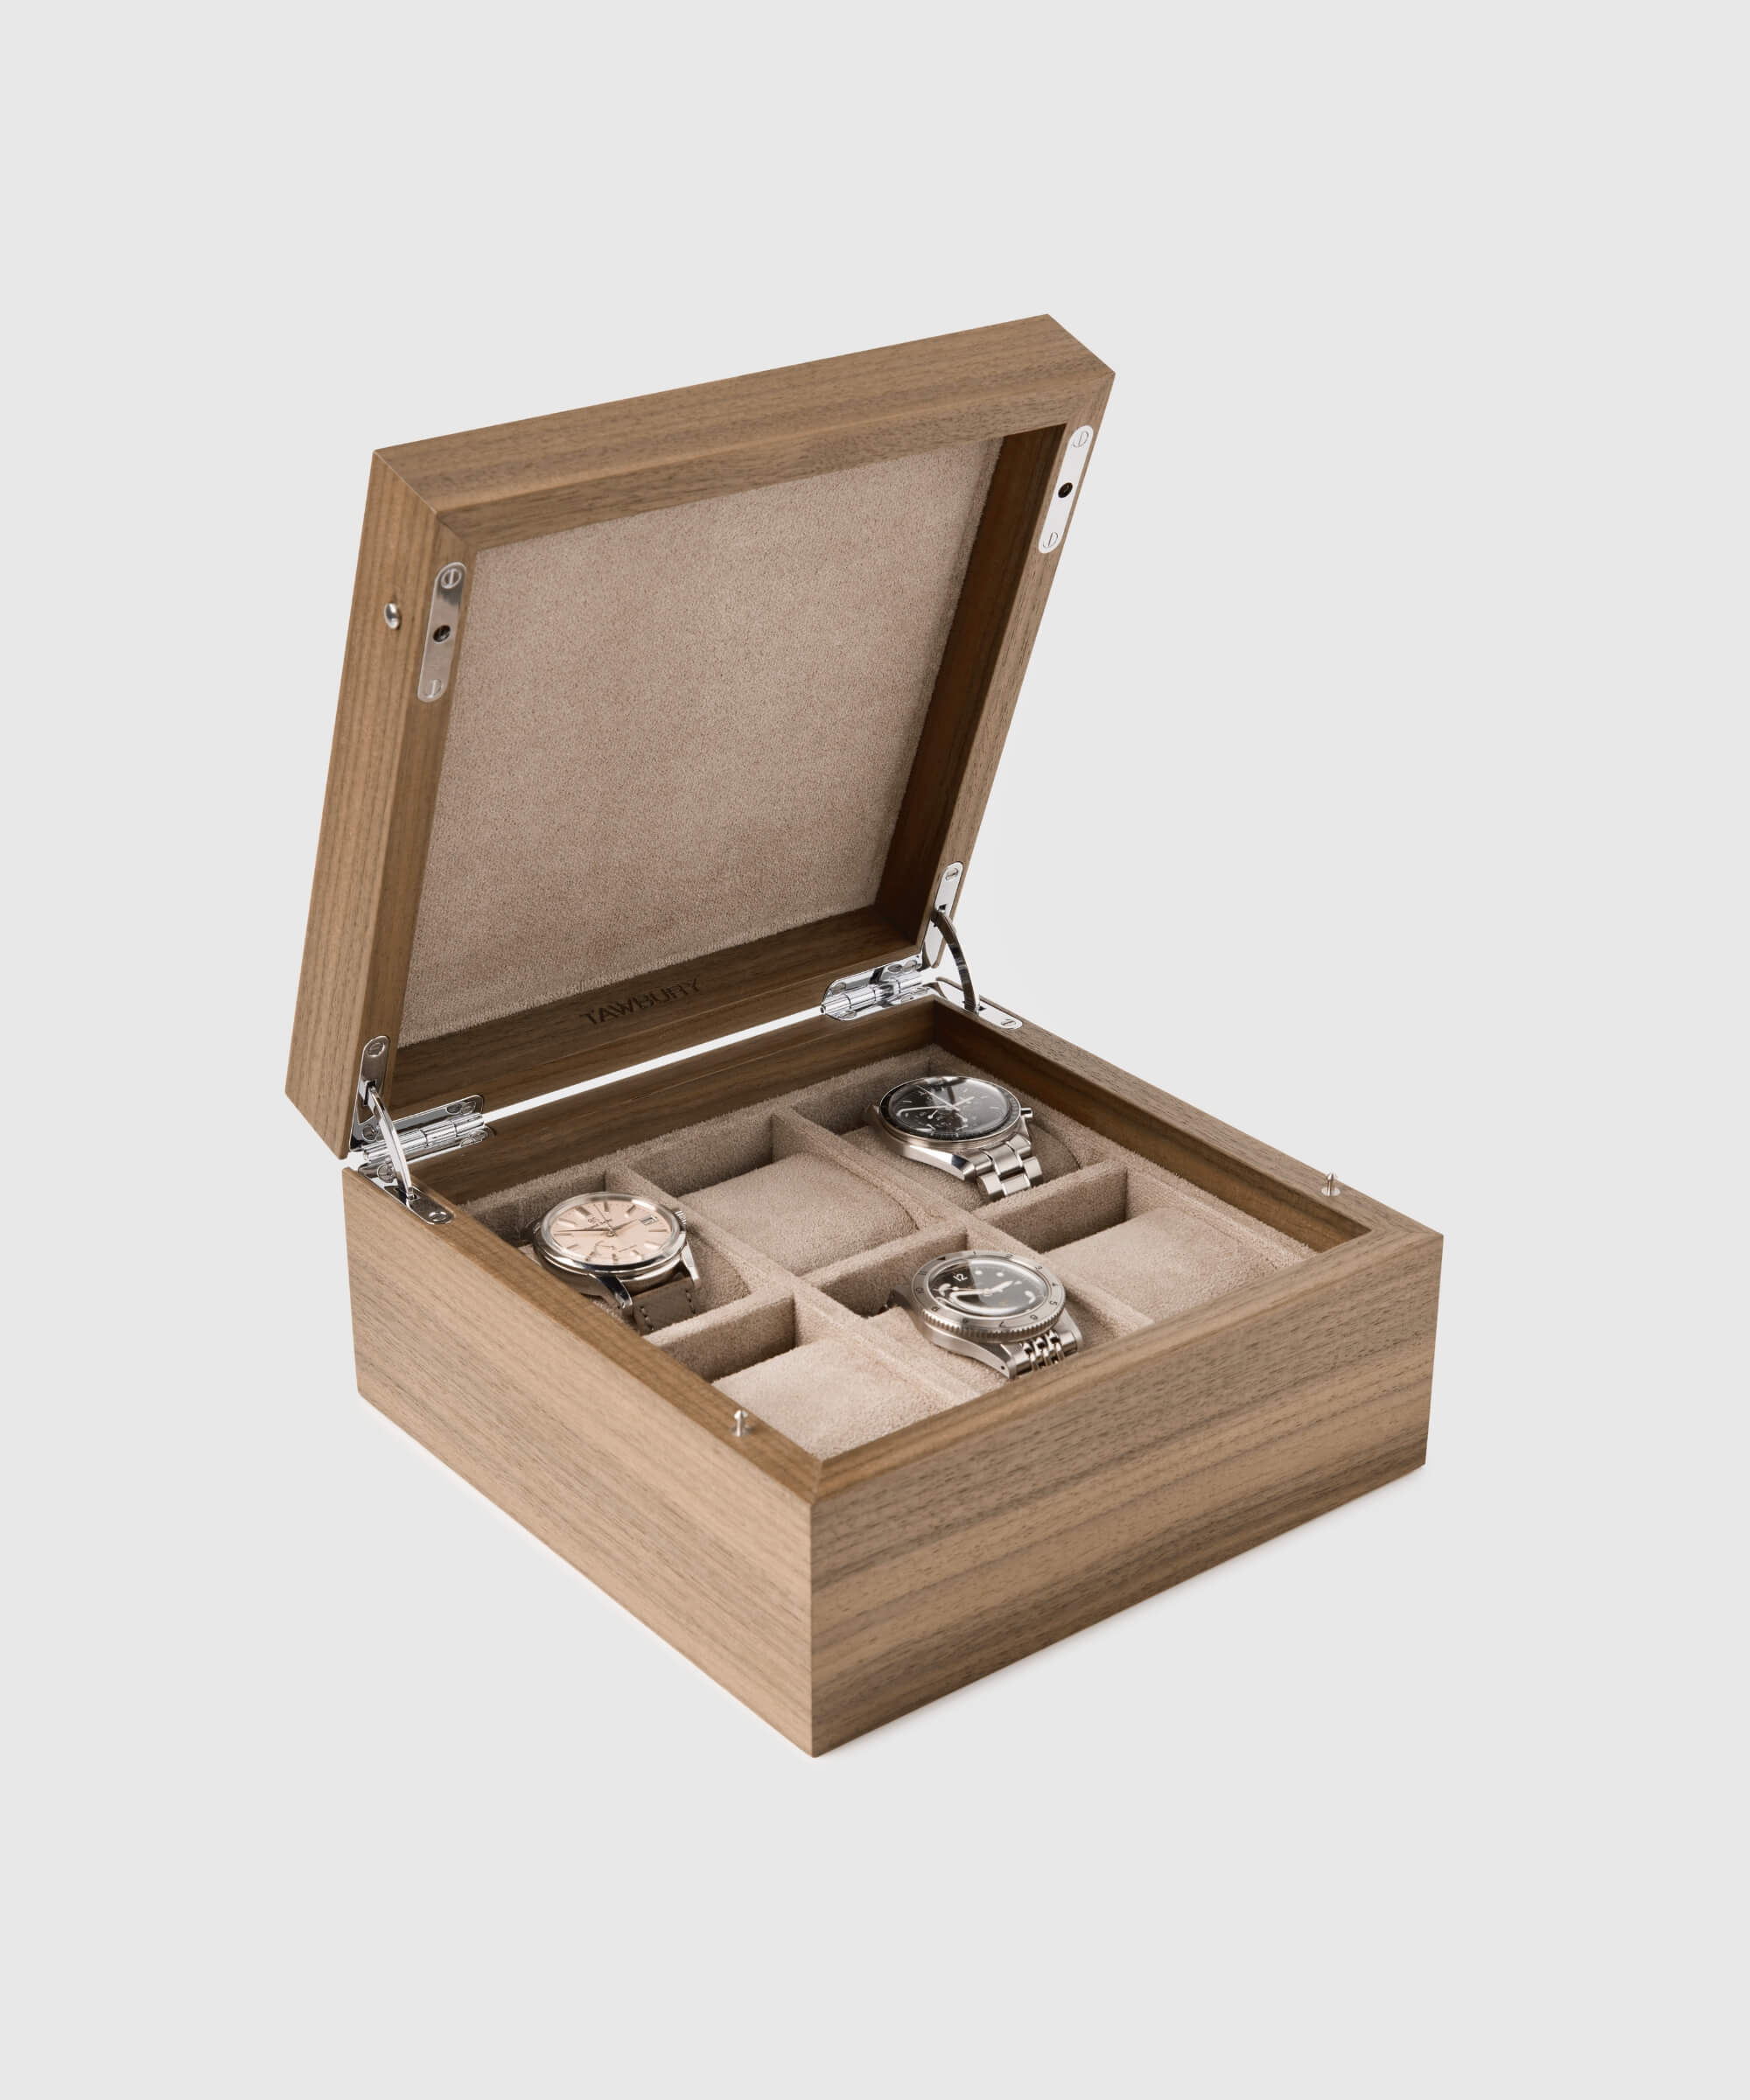 The TAWBURY Grove 6 Slot Watch Box with Solid Lid - Walnut is a sleek wooden watch box perfect for organizing and displaying watch collections. It comes with four exquisite timepieces encased within.